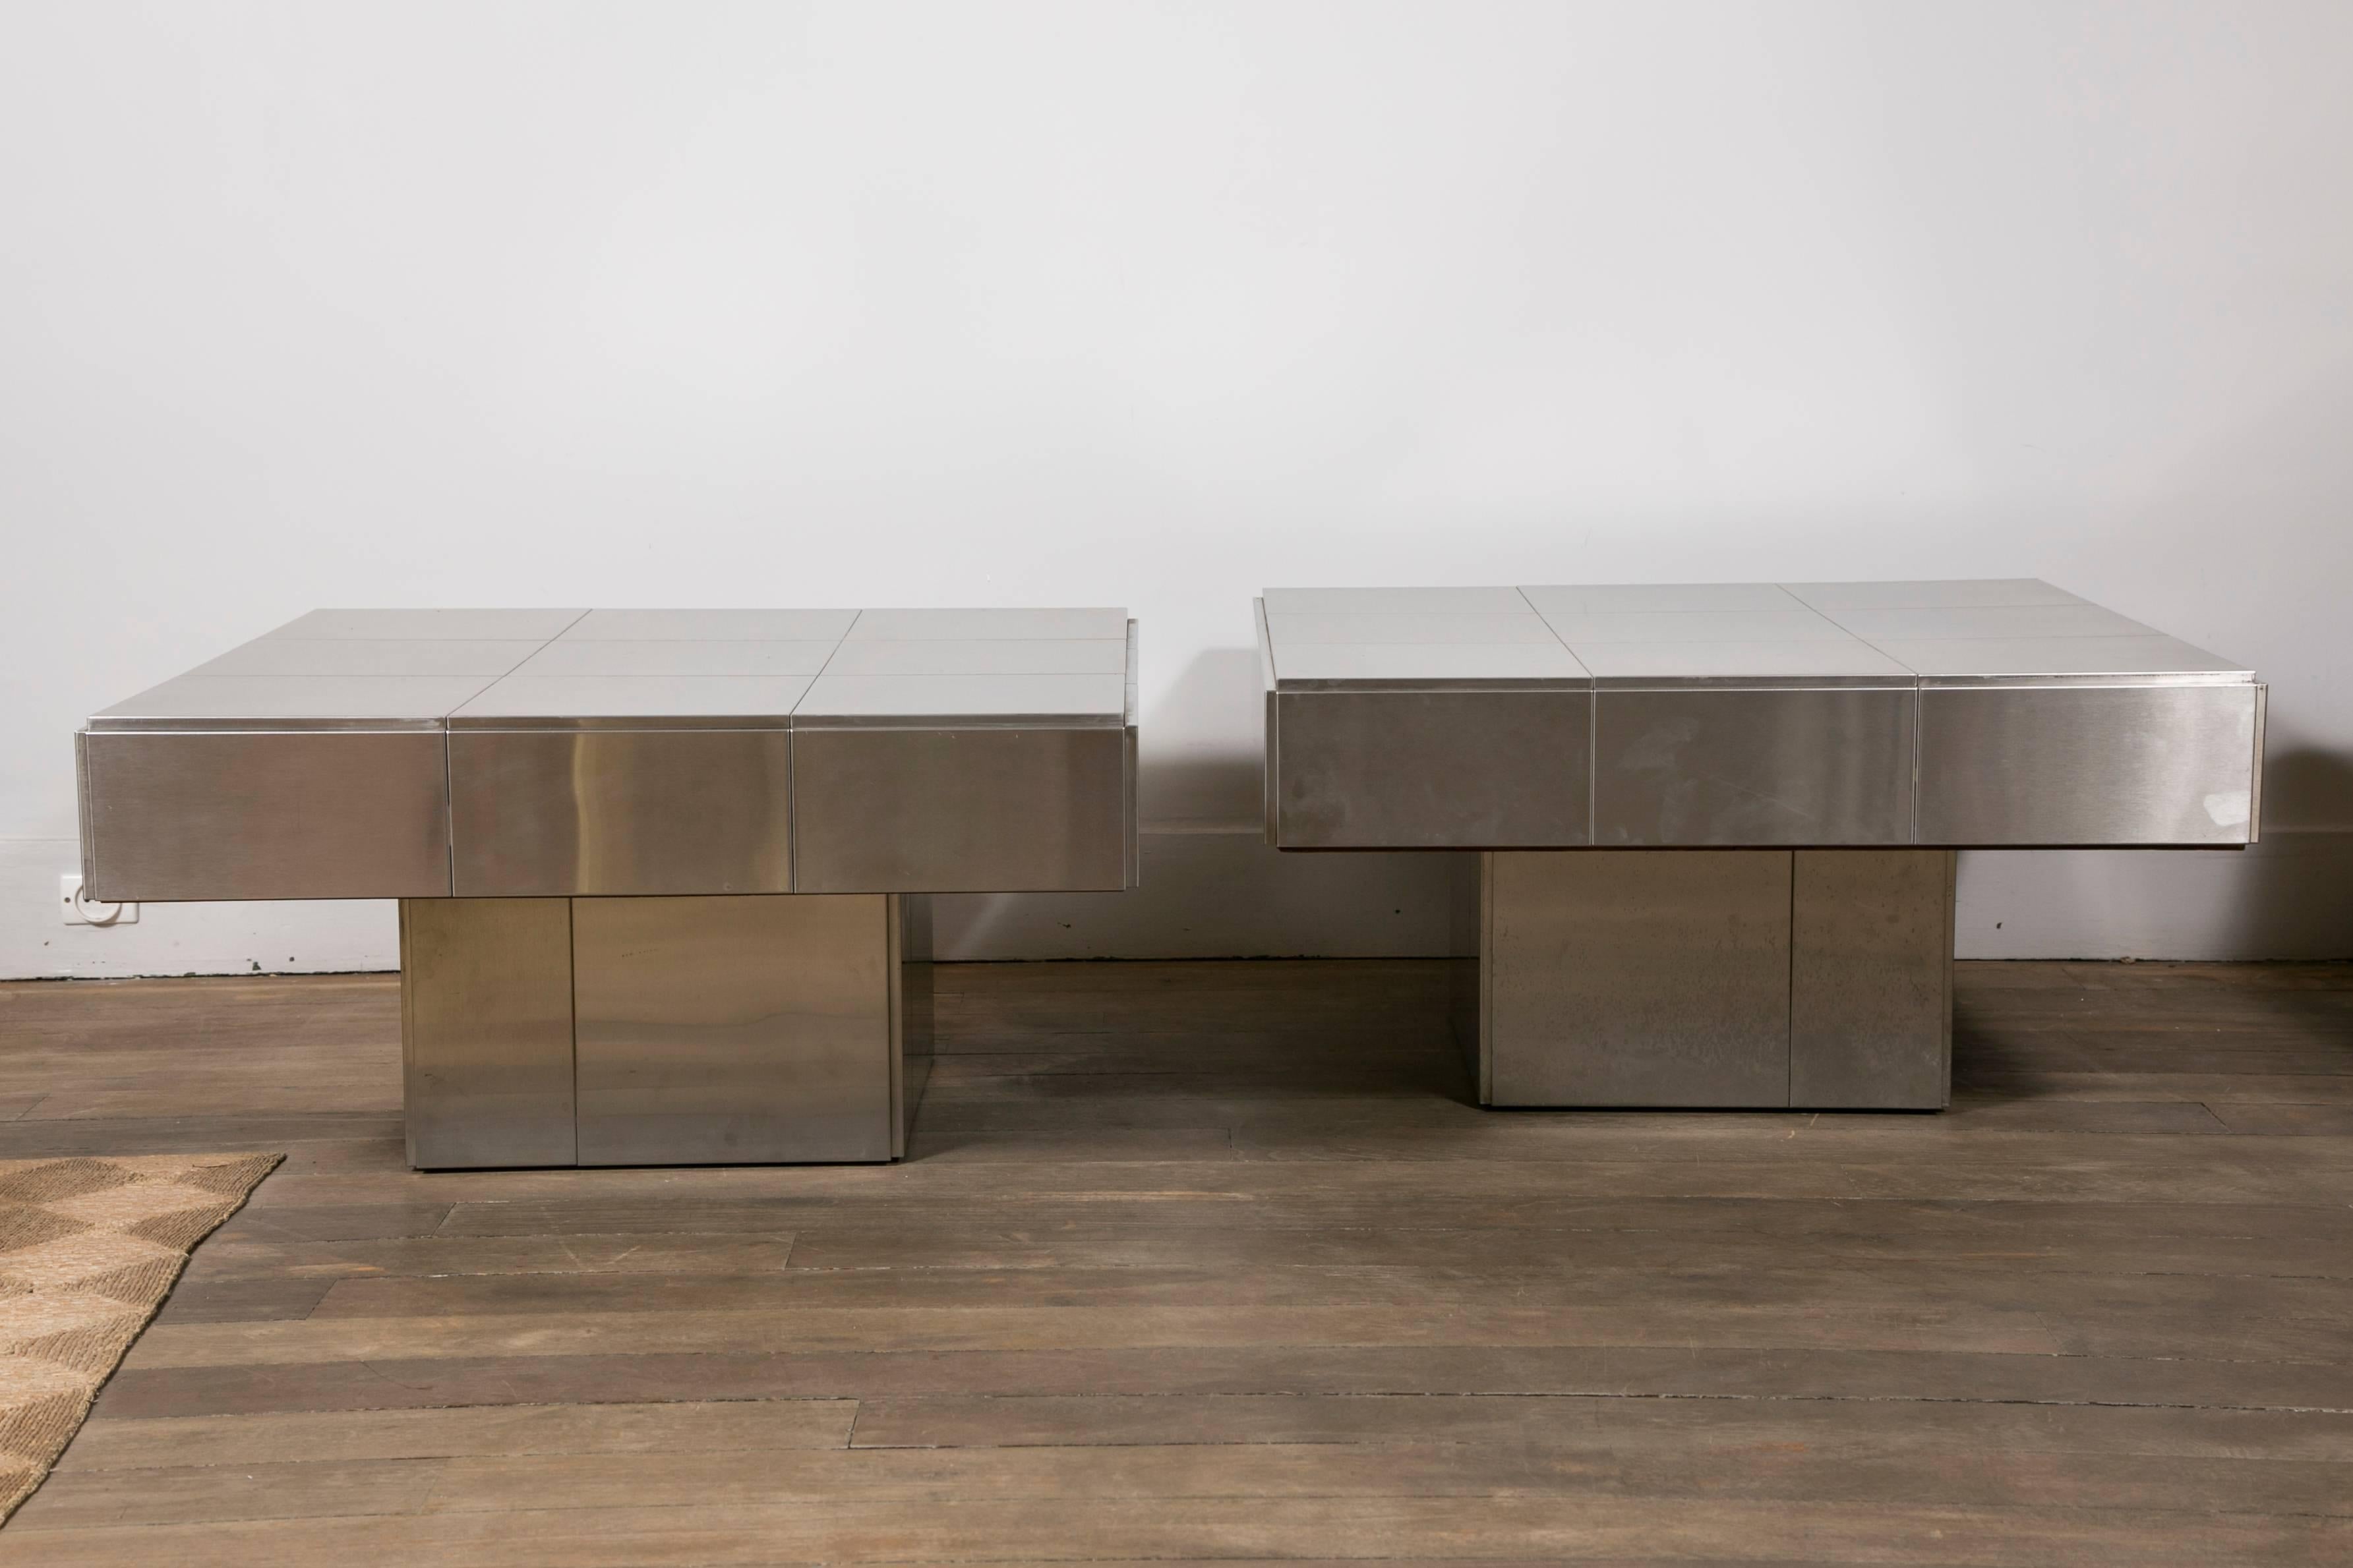 A pair of square large inox / stainless steel end tables.
Inspired by Paul Evans 